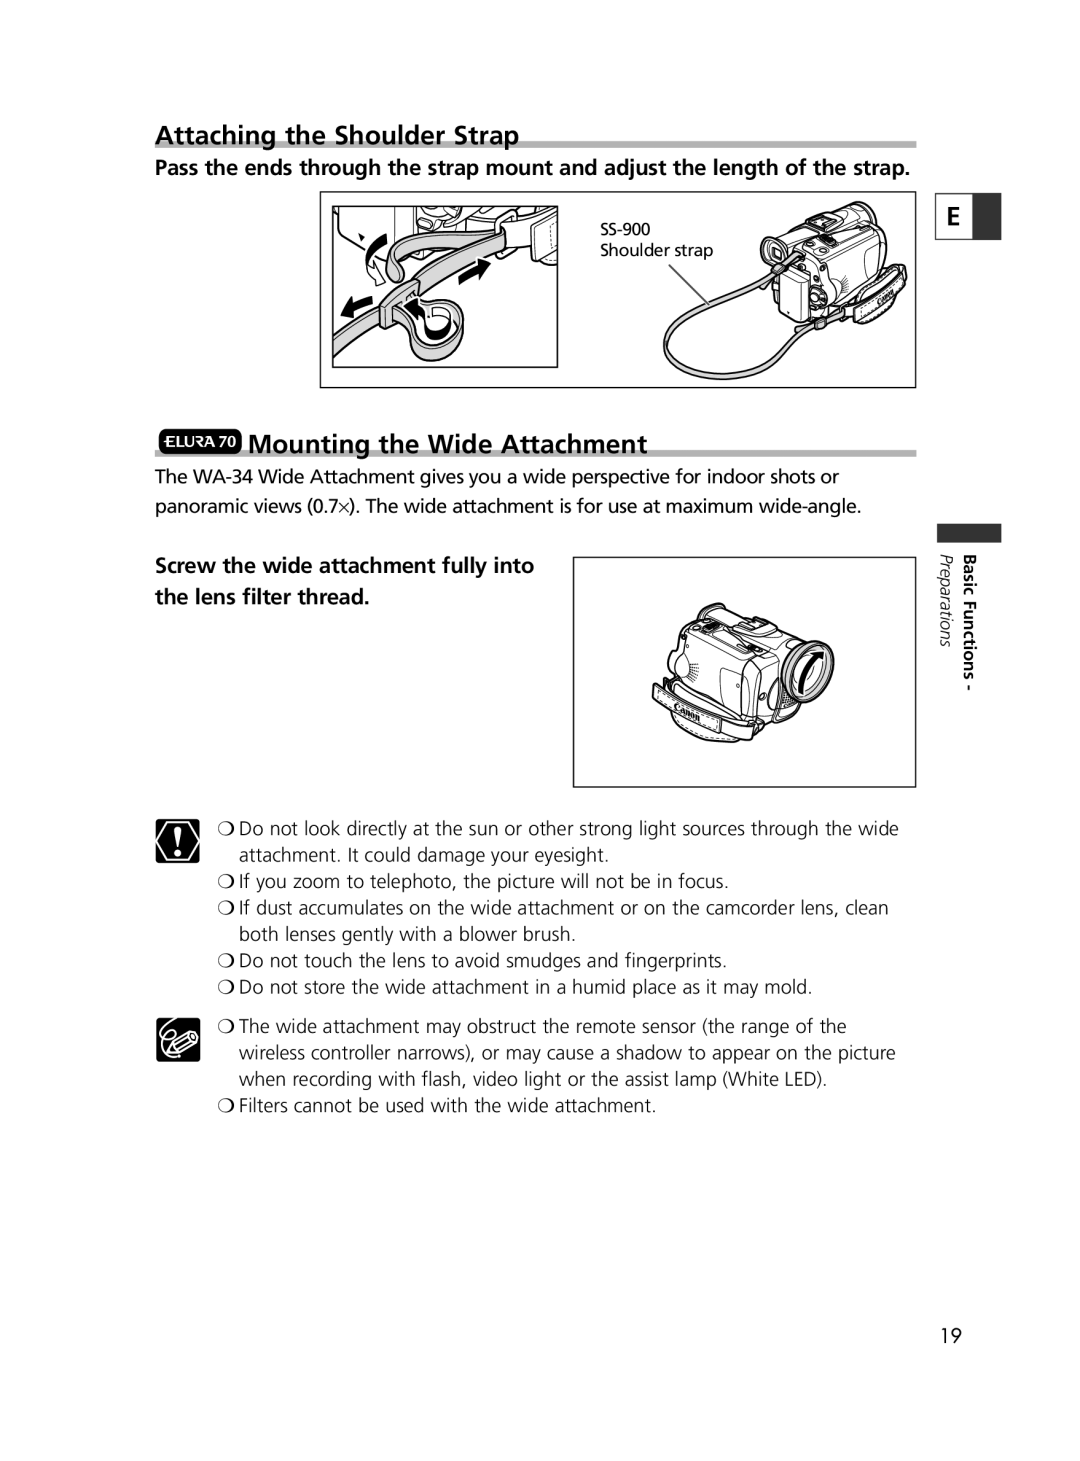 Canon 65, 60 instruction manual Attaching the Shoulder Strap, Mounting the Wide Attachment 